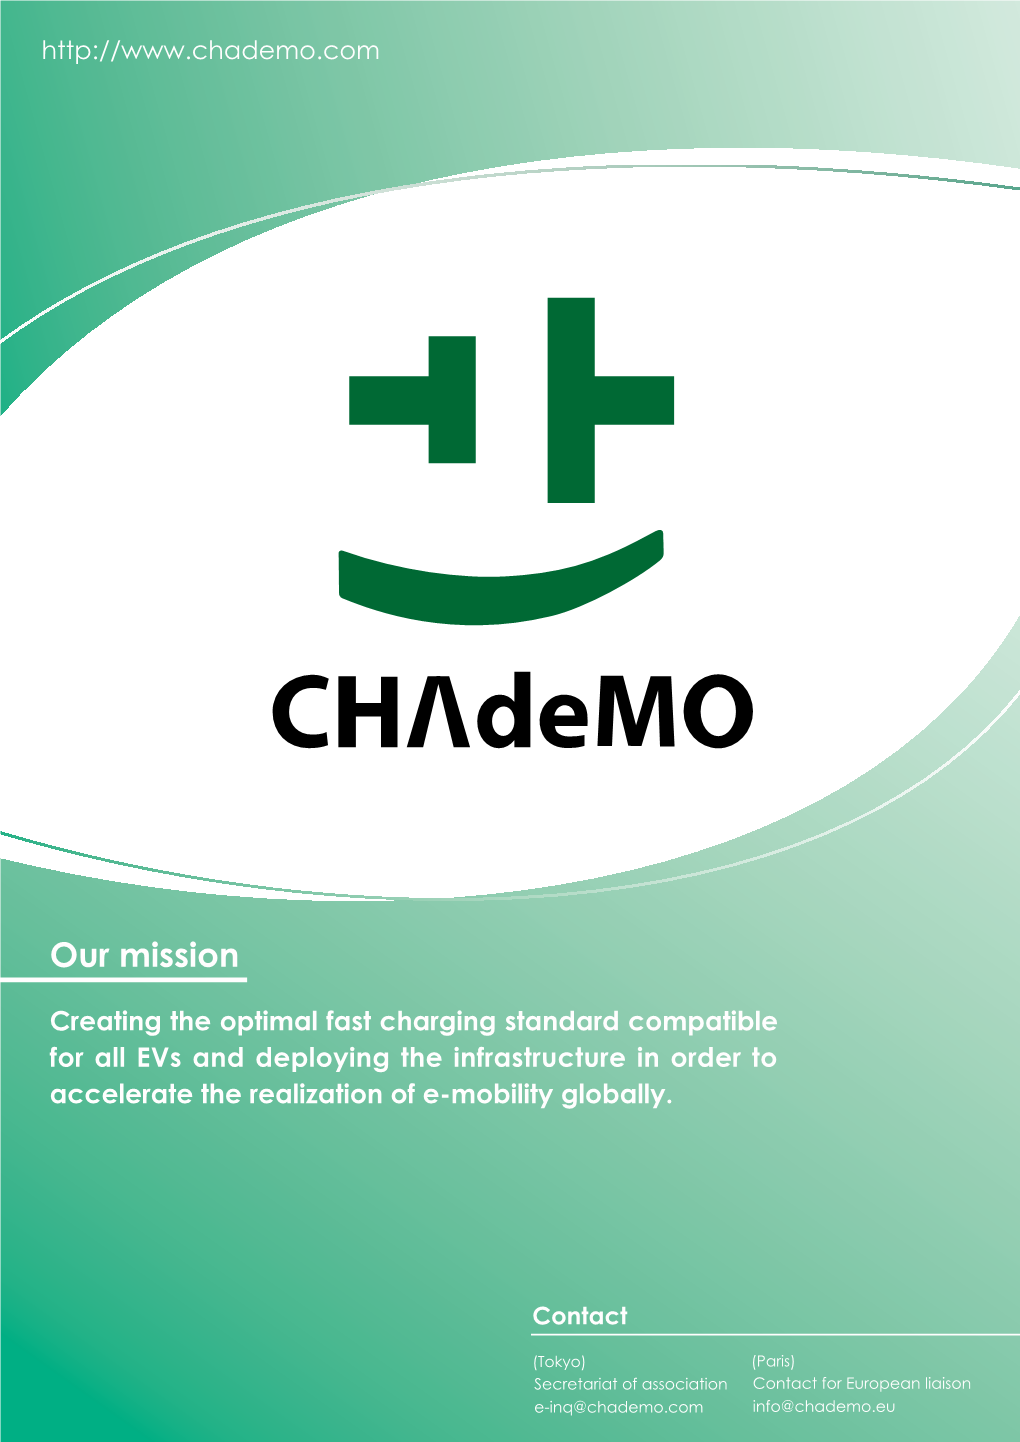 Chademo Fast Charging Solution Is an Accelerator in the Uptake of Electric Vehicles